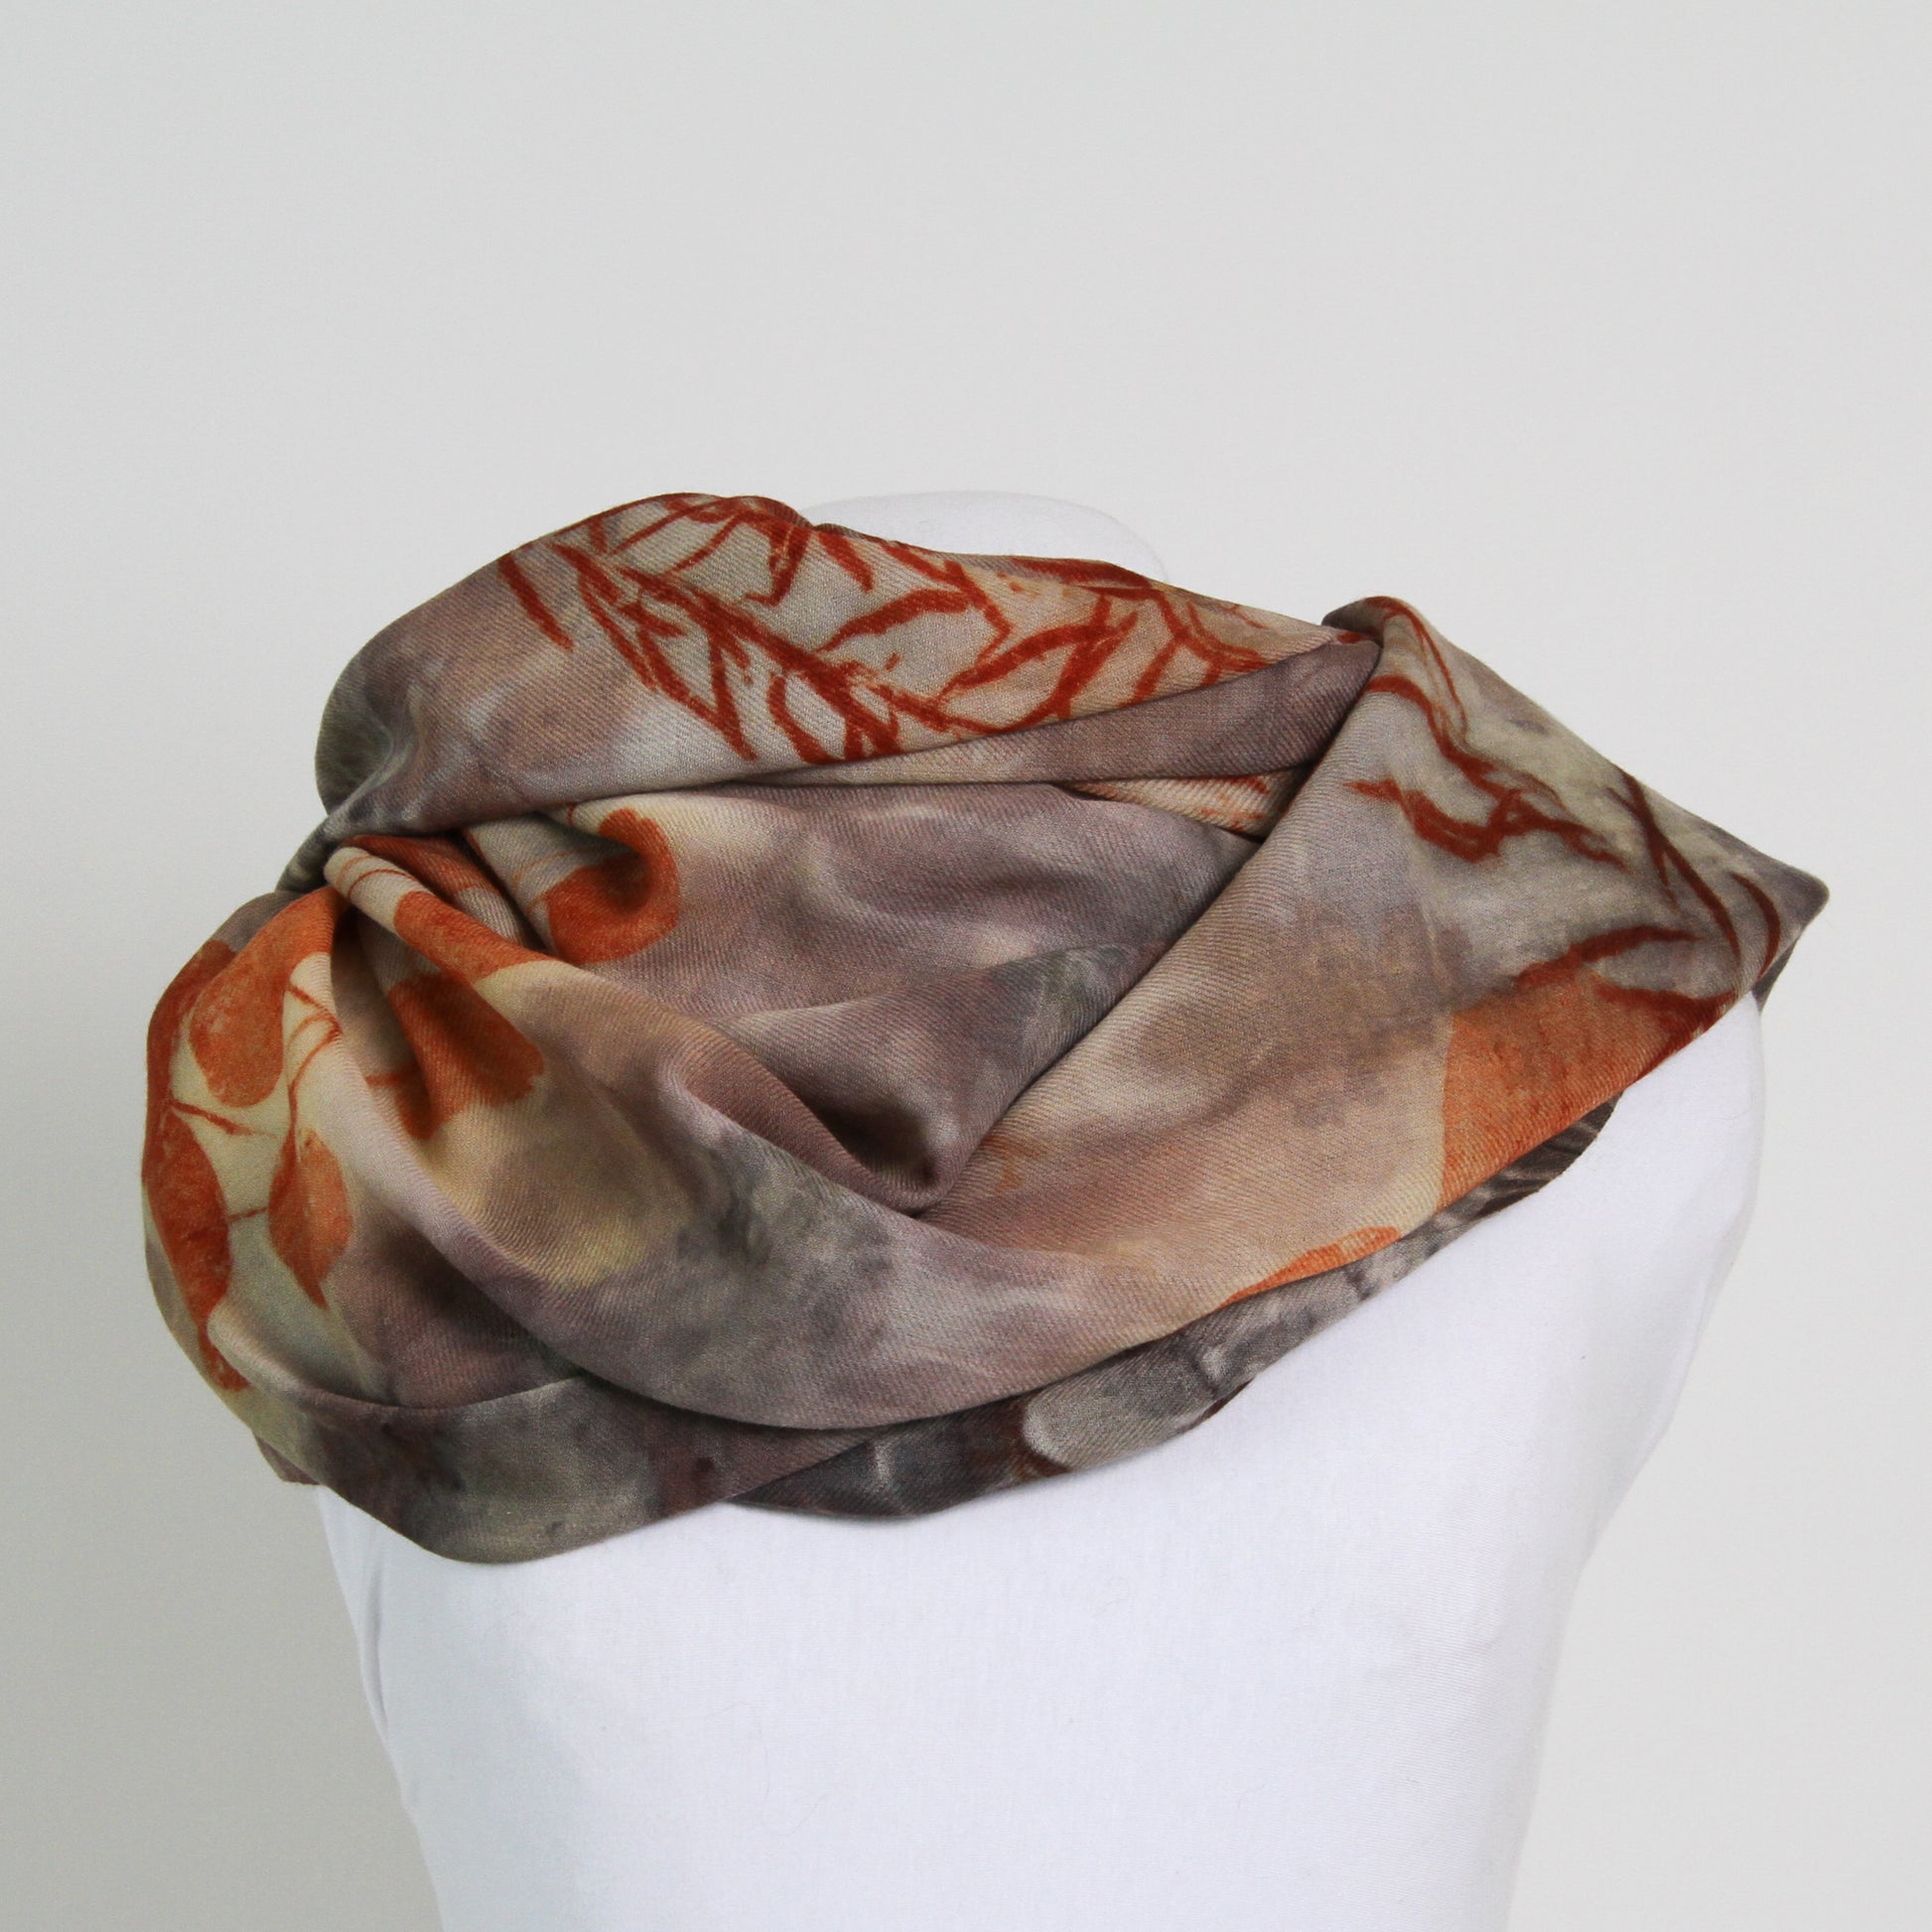 Back view of brown wool scarf with orange printed leaves and foliage